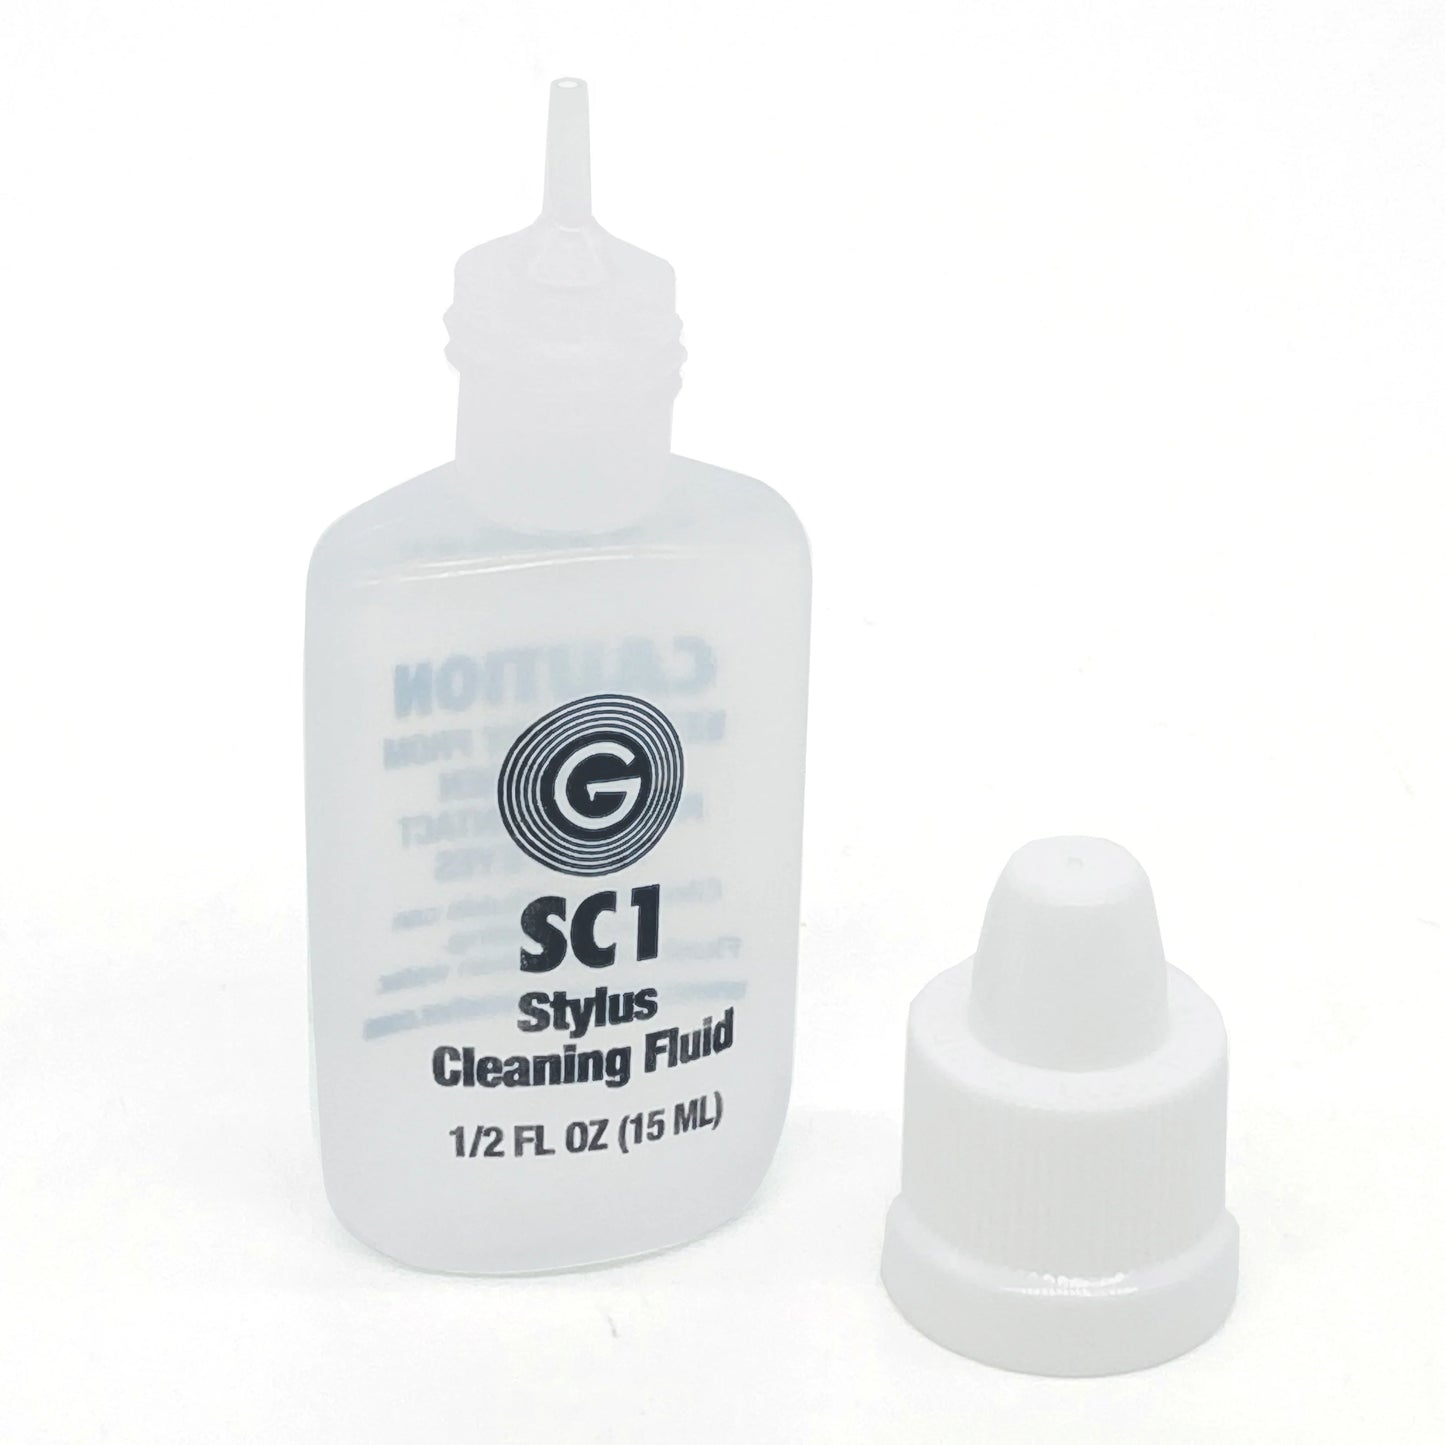 Groovewasher - Stylus Cleaning SC1 Kit